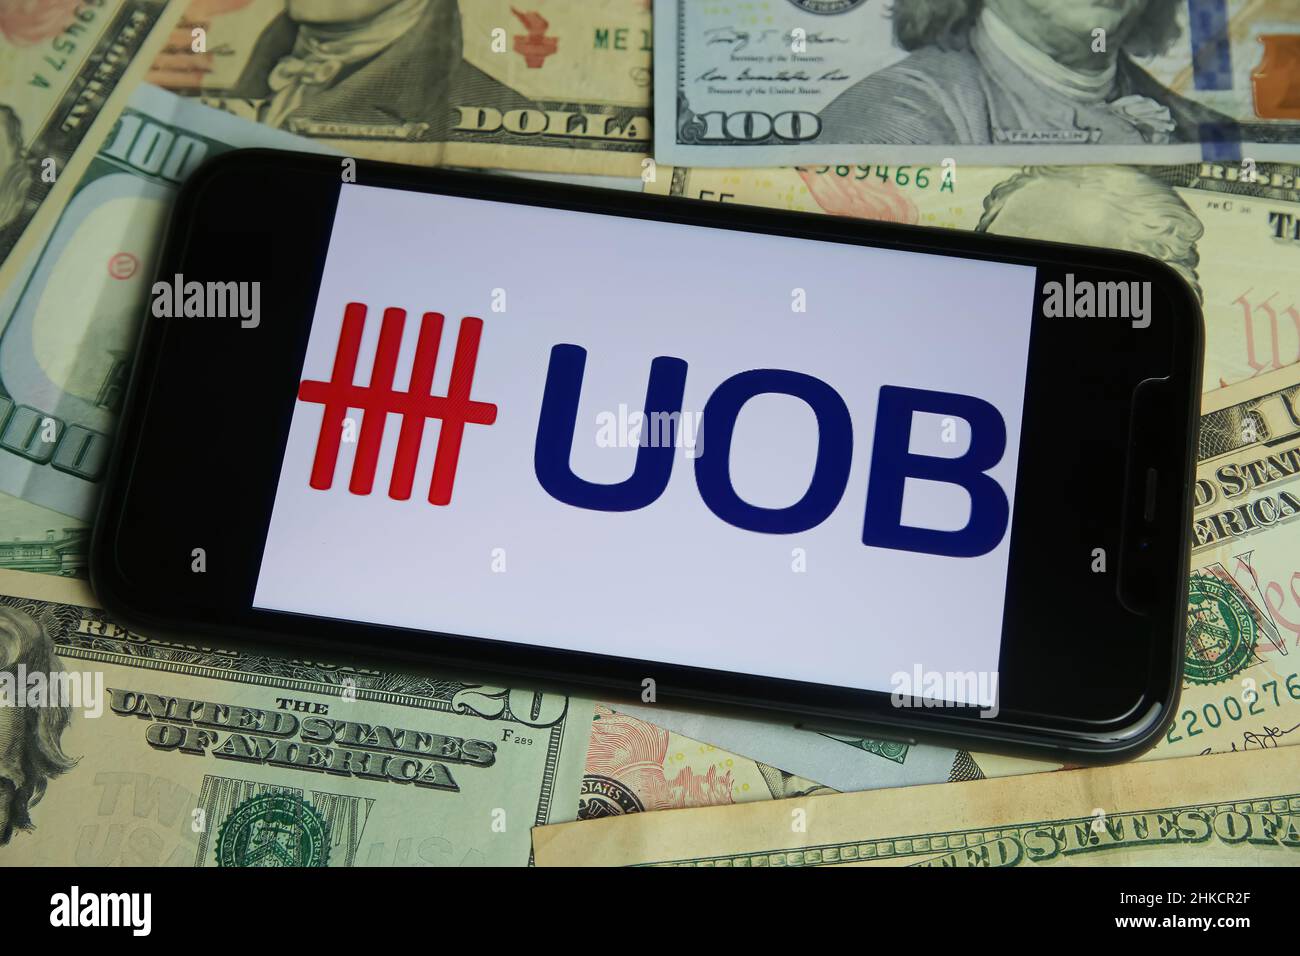 Viersen, Germany - January 9. 2022: Closeup of mobile phone with logo of united overseas bank UOB, us dollar paper banknotes background Stock Photo